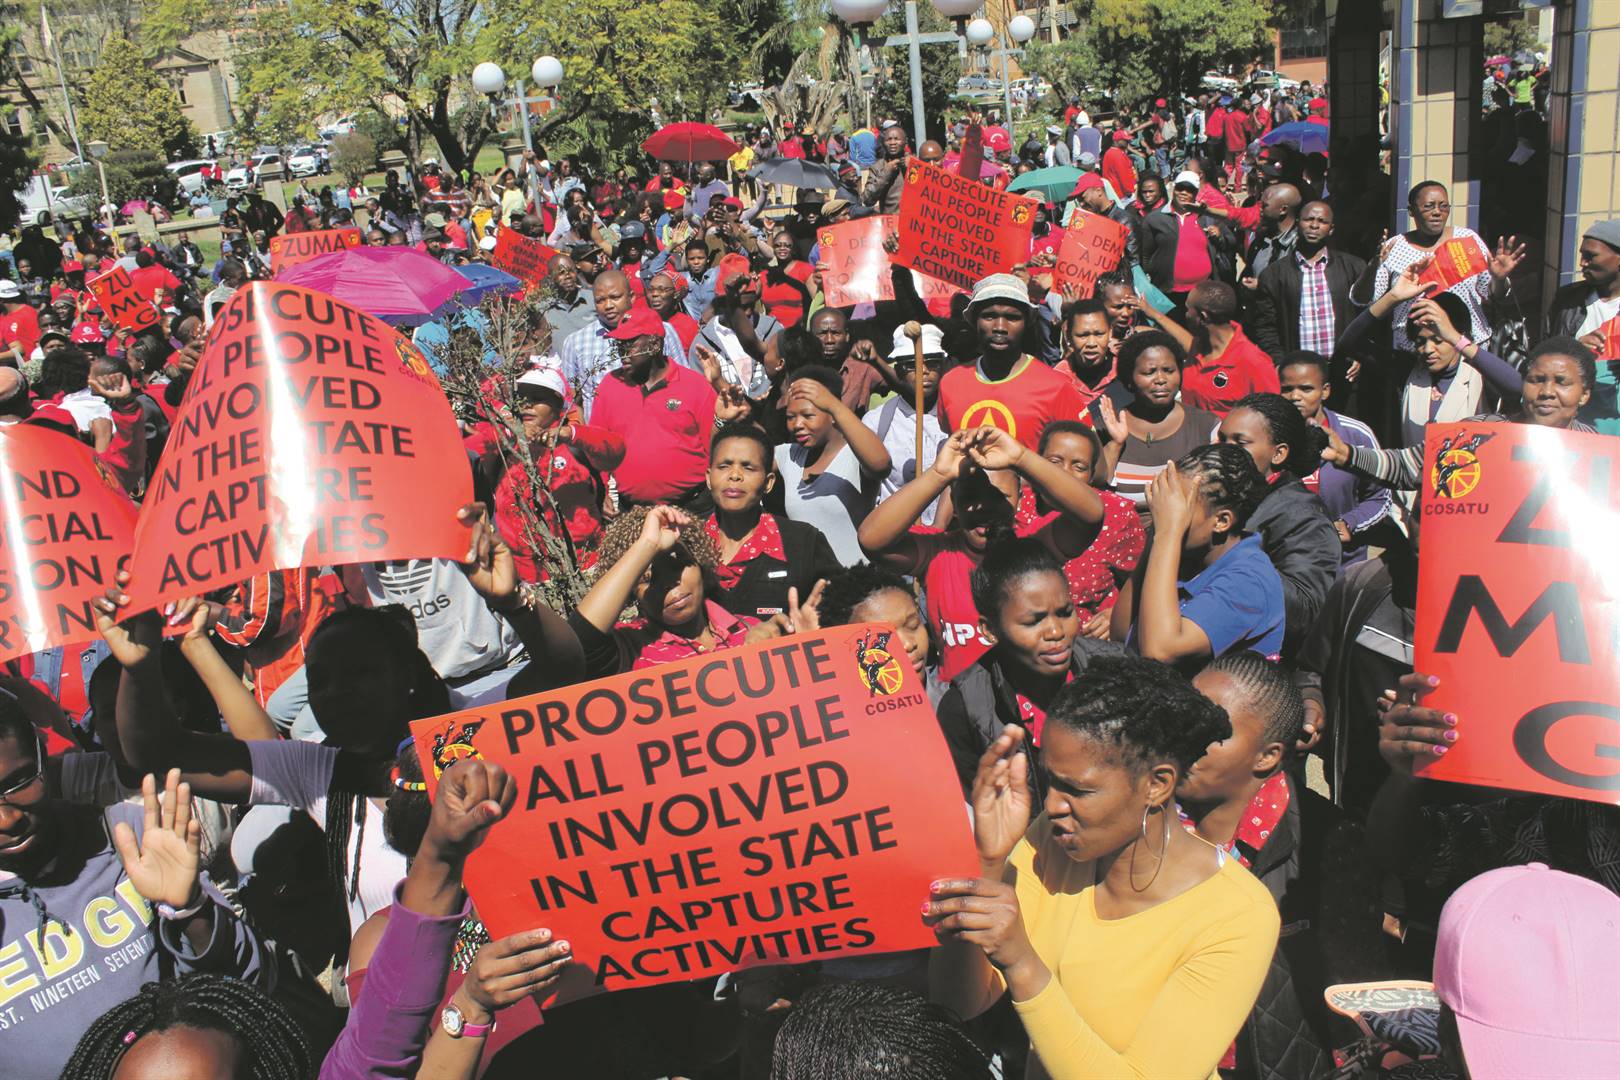 A sea of red fills the streets of Mthatha as Cosatu workers strike. The question remains as to union apathy in the face of state capture. Photo: Ziyanda Zweeni